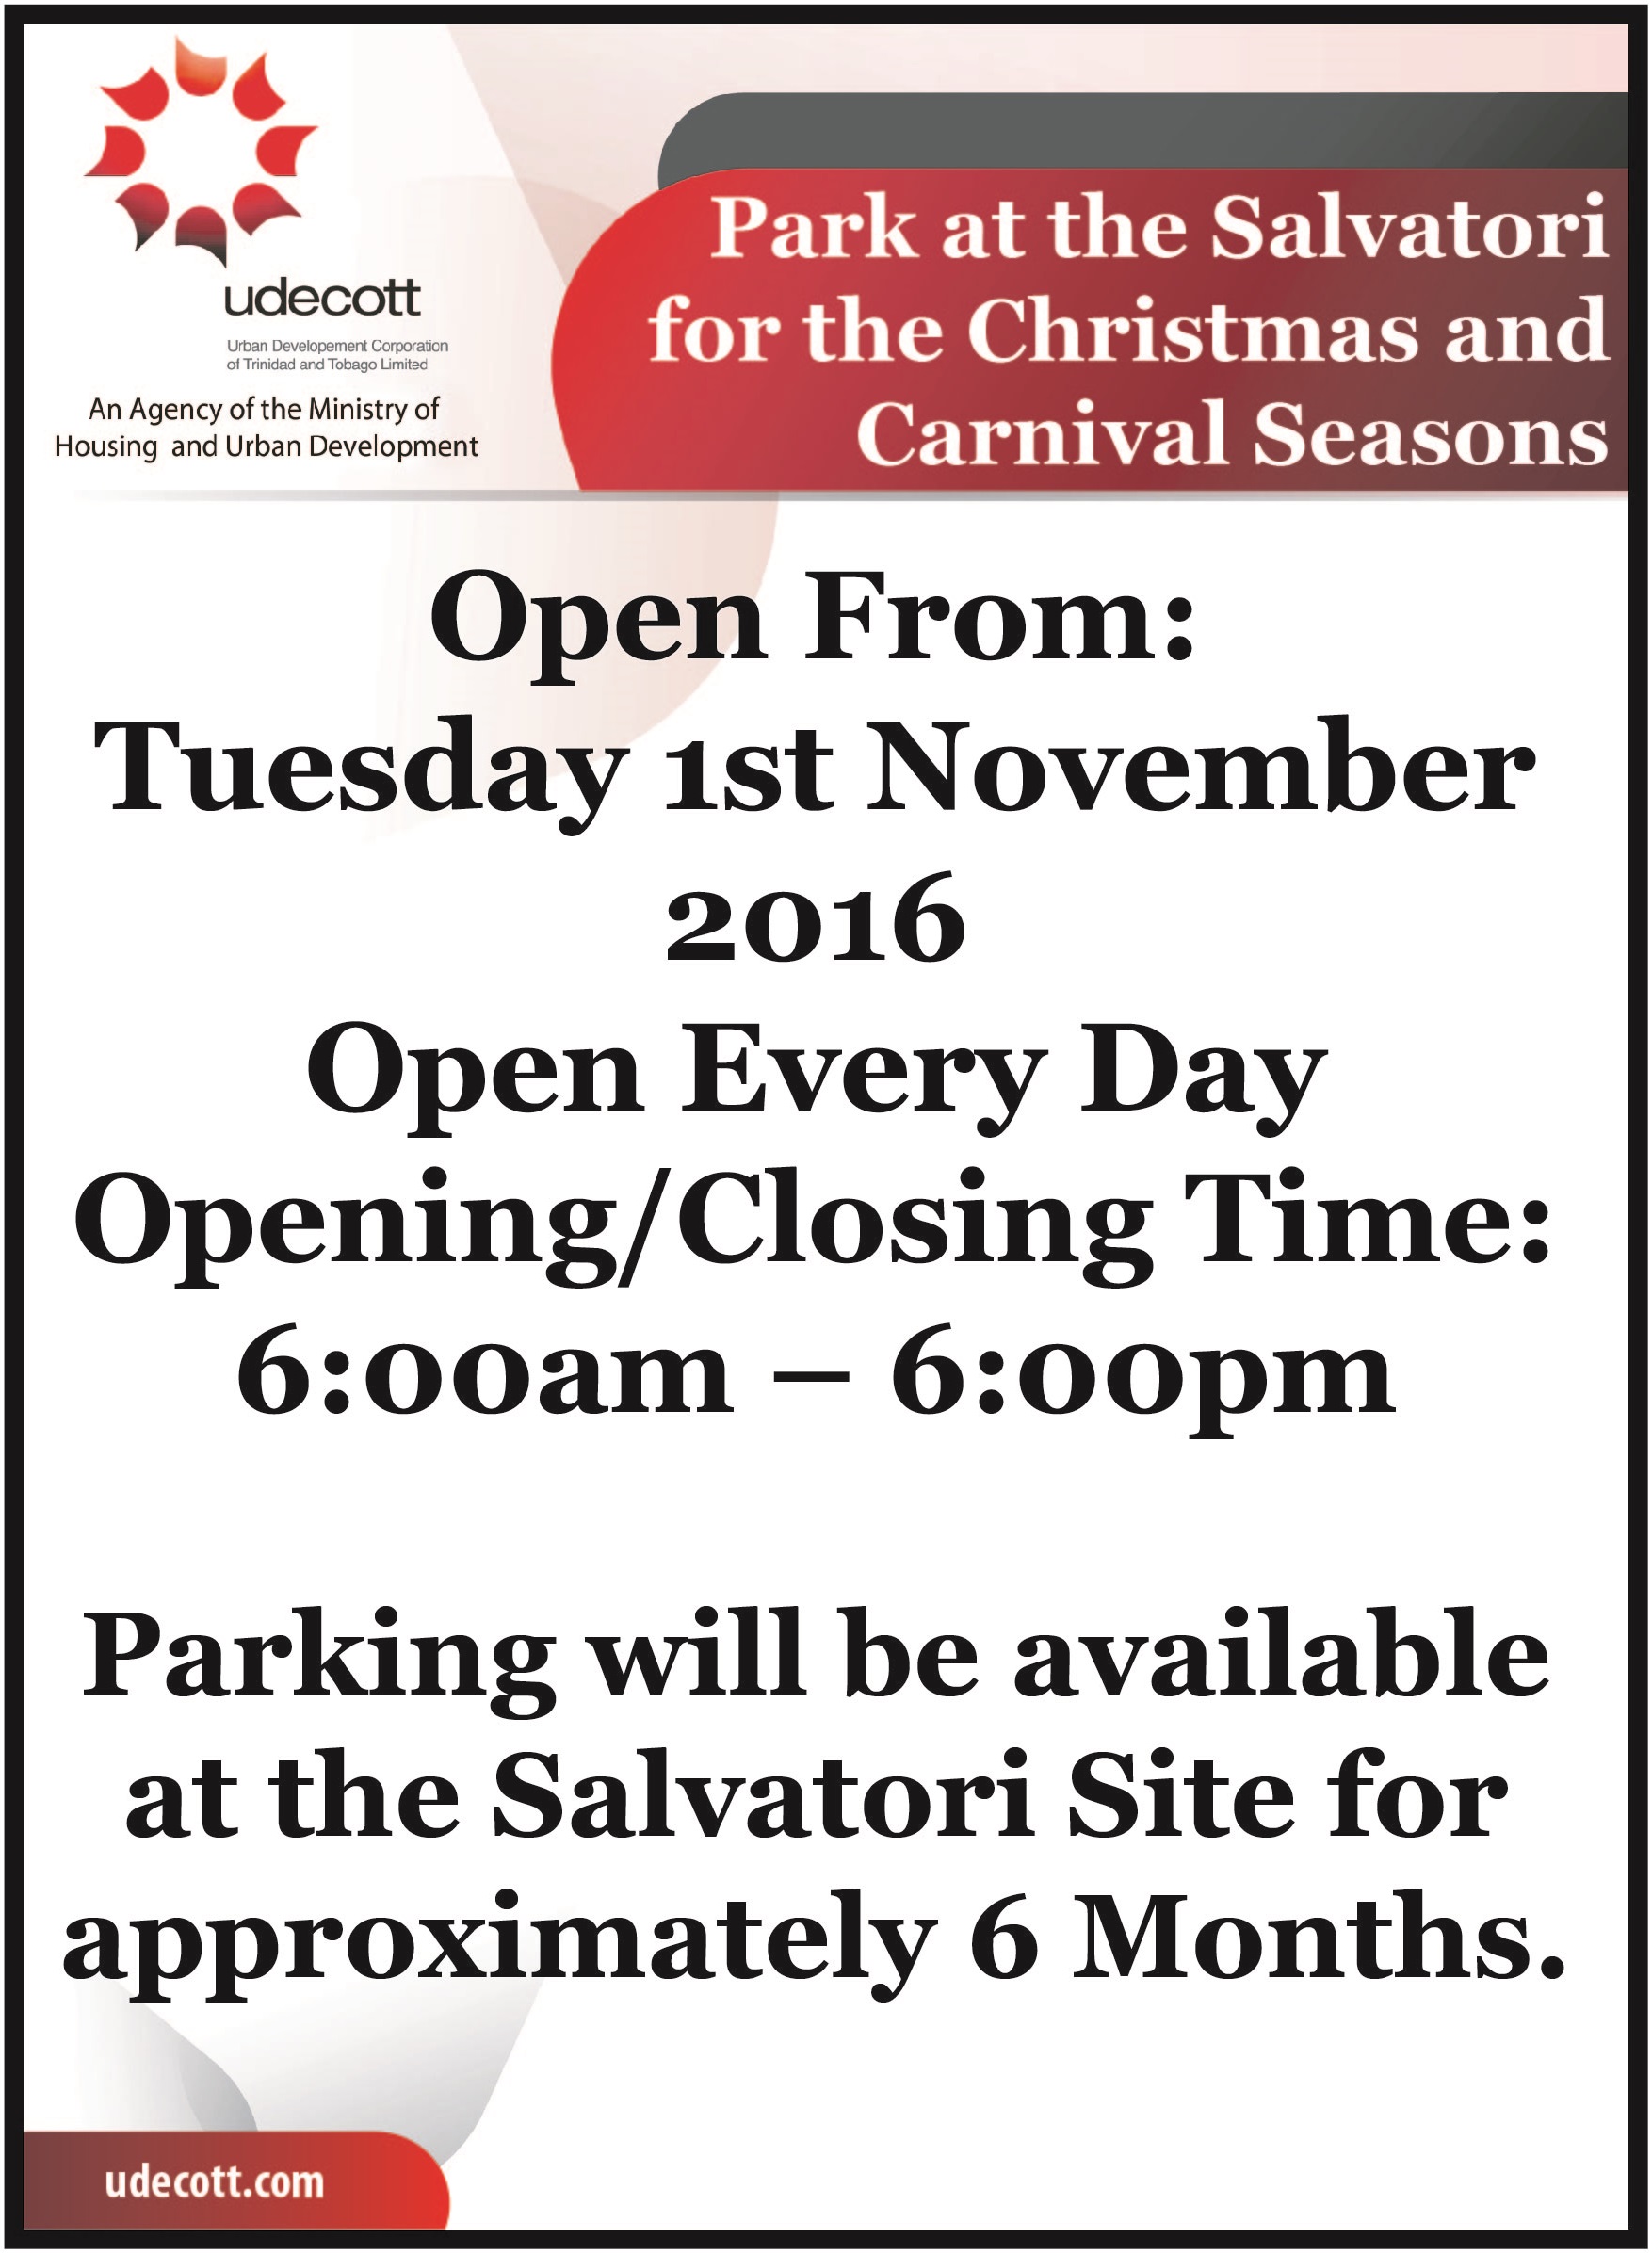 parking-at-the-salvatori-for-christmas-and-carnival-seasons1